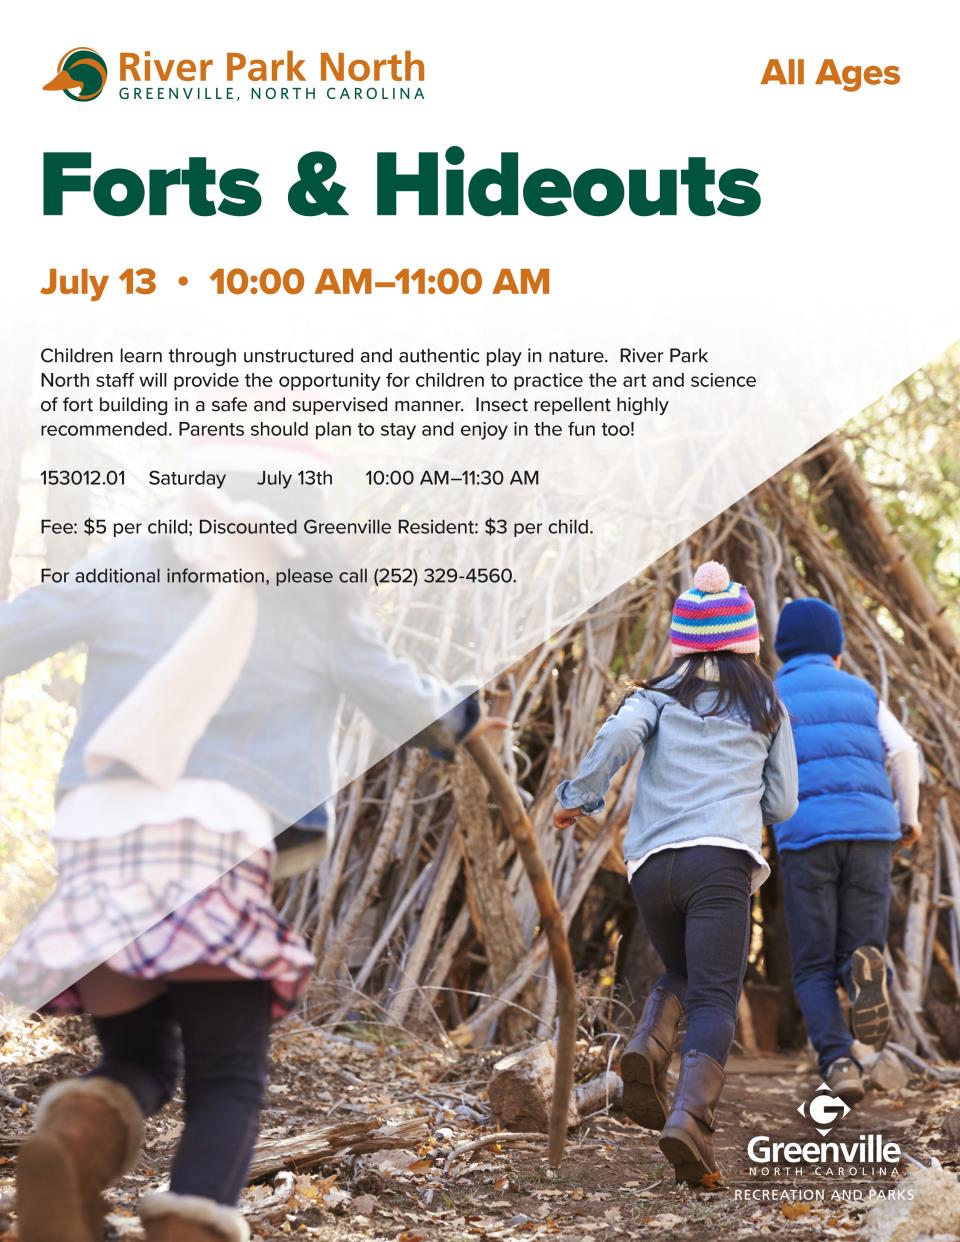 2019 Forts & Hideouts